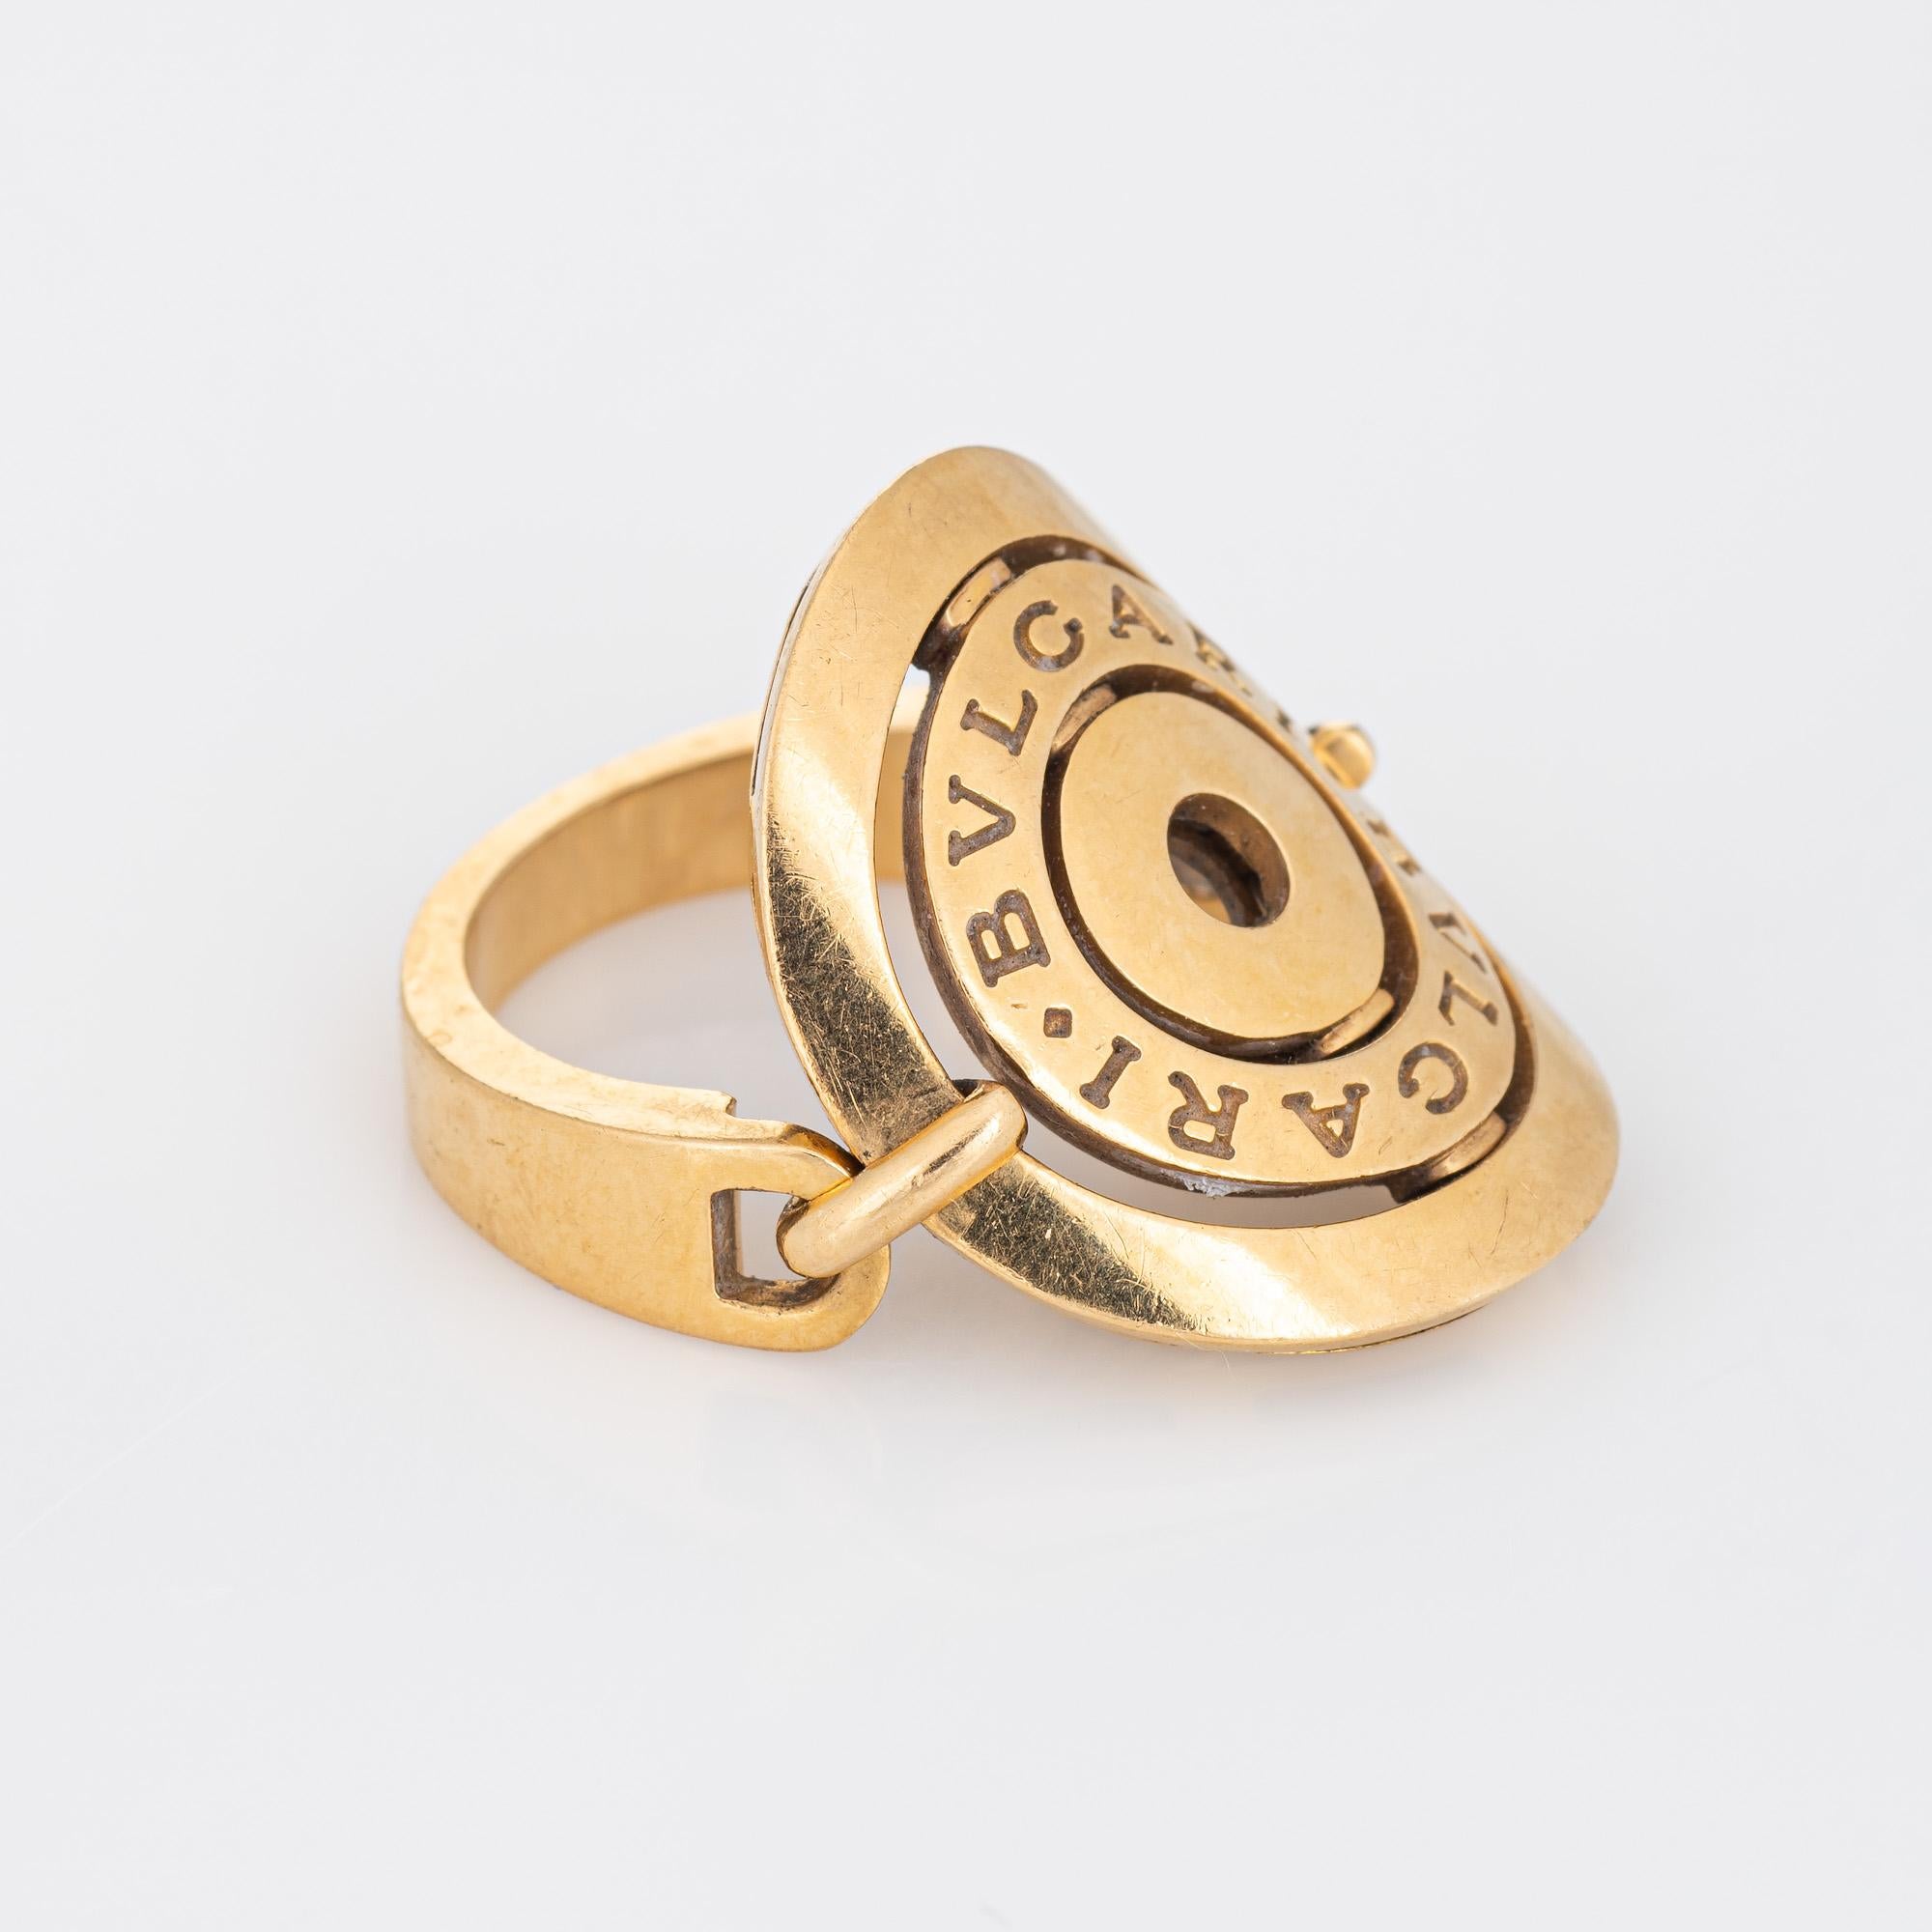 Pre-owned Bulgari 'Astrale Cerchi' ring crafted in 18k yellow gold.  

The classic Bulgari ring features a hinged circular mount, with a curved saddle to meld to the shape of your finger. The ring sits flat on the finger and is great worn alone or